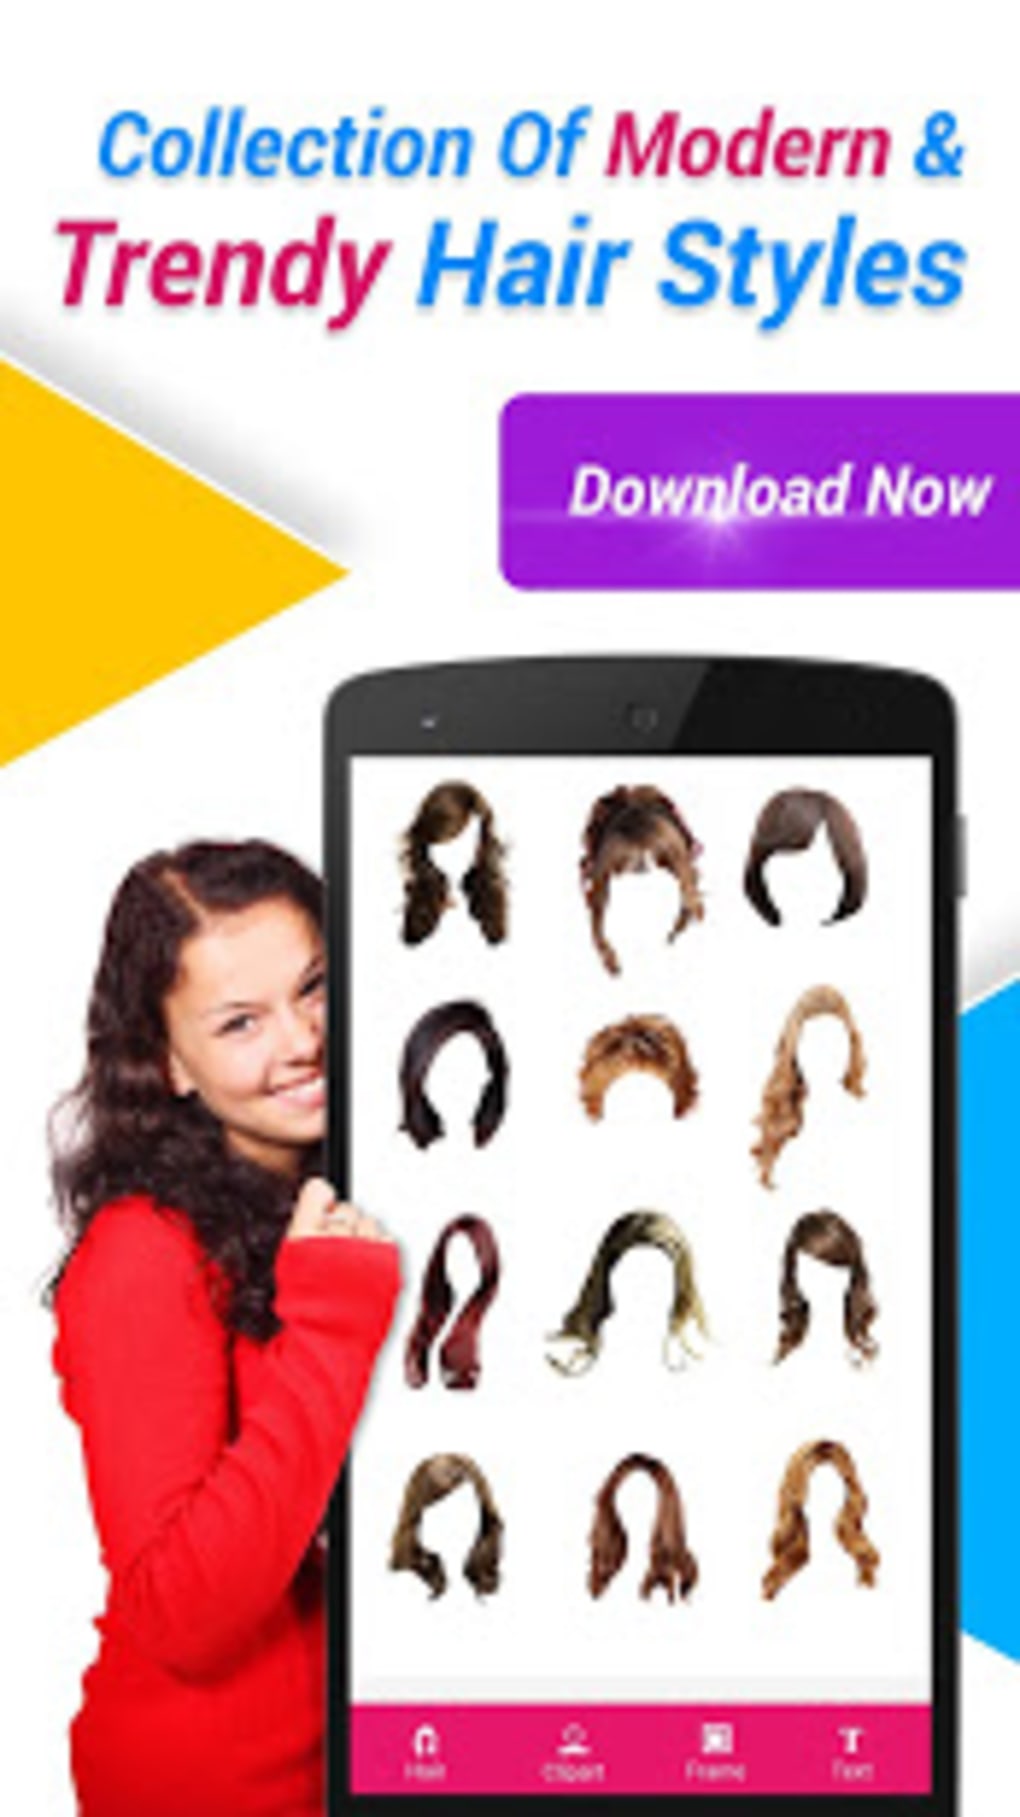 Women Hair Style Photo Editor for Android - Download